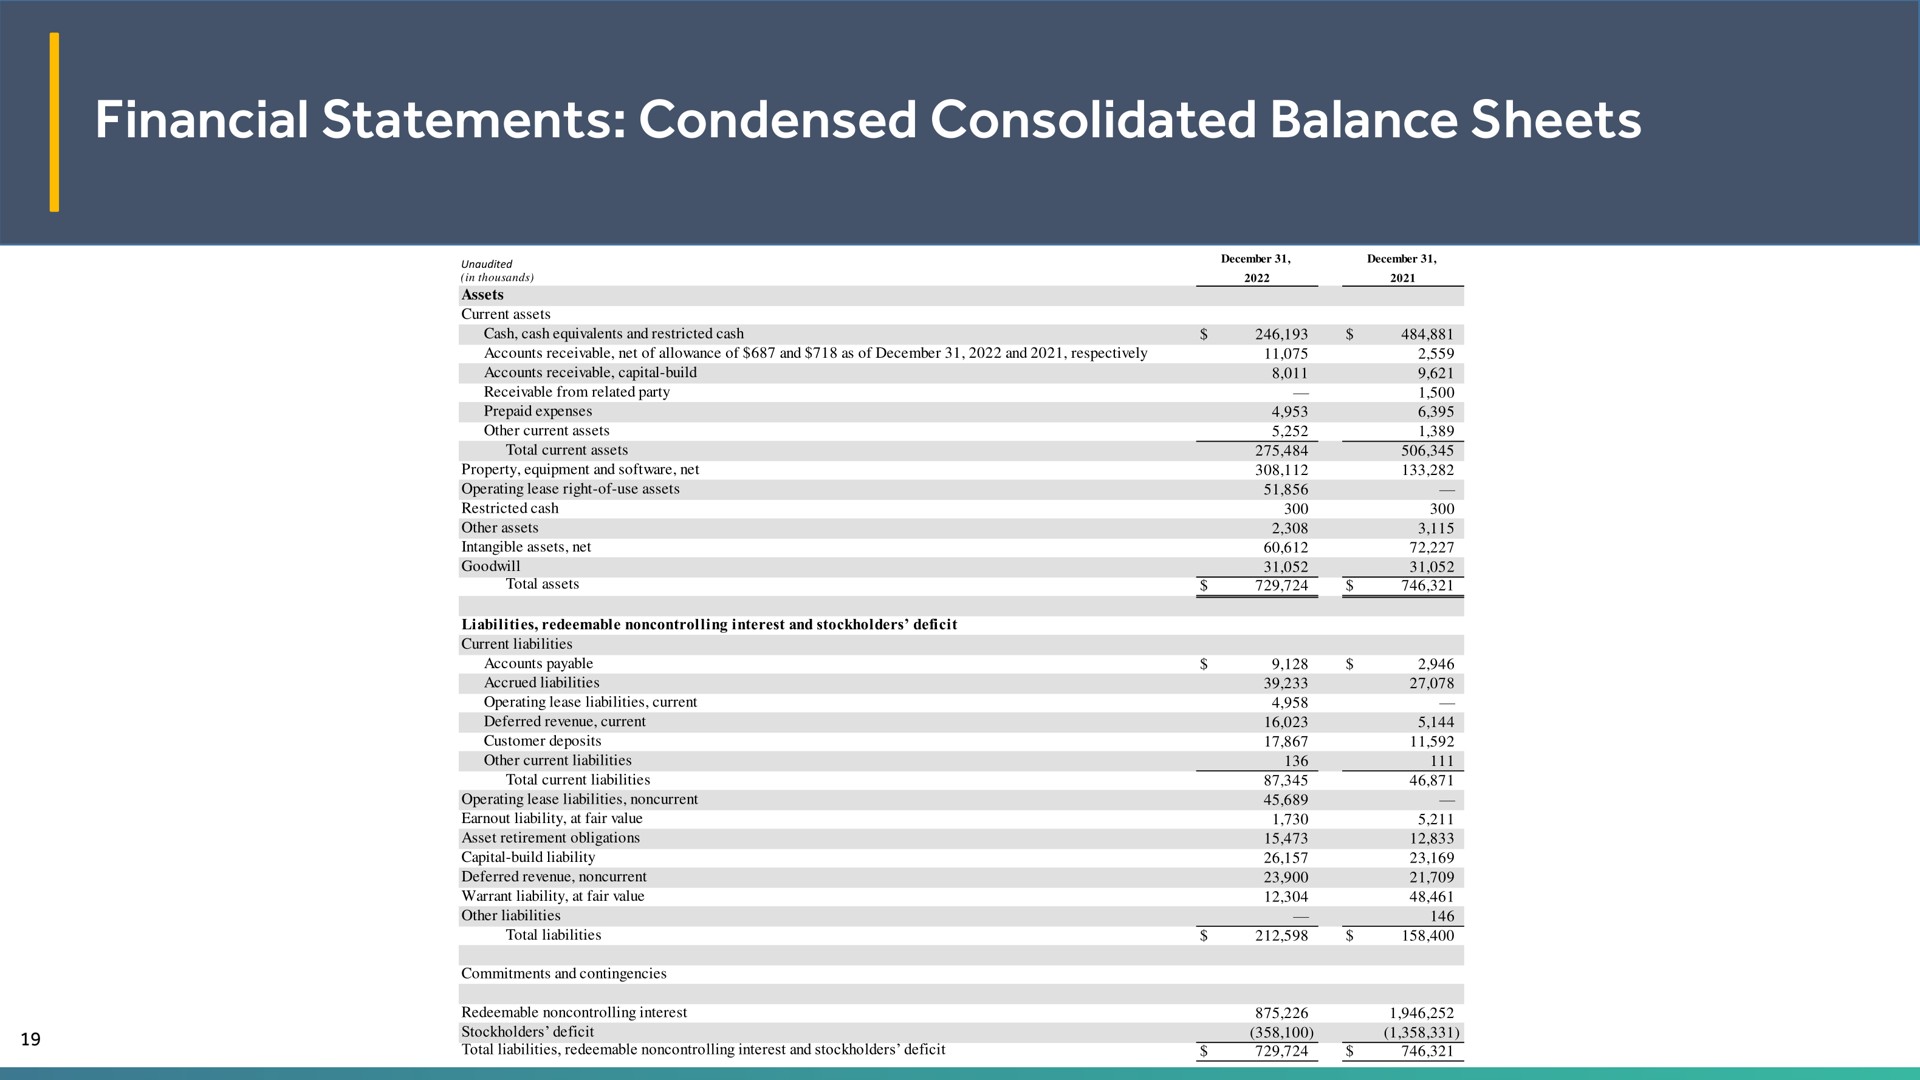 financial statements condensed consolidated balance sheets | EVgo